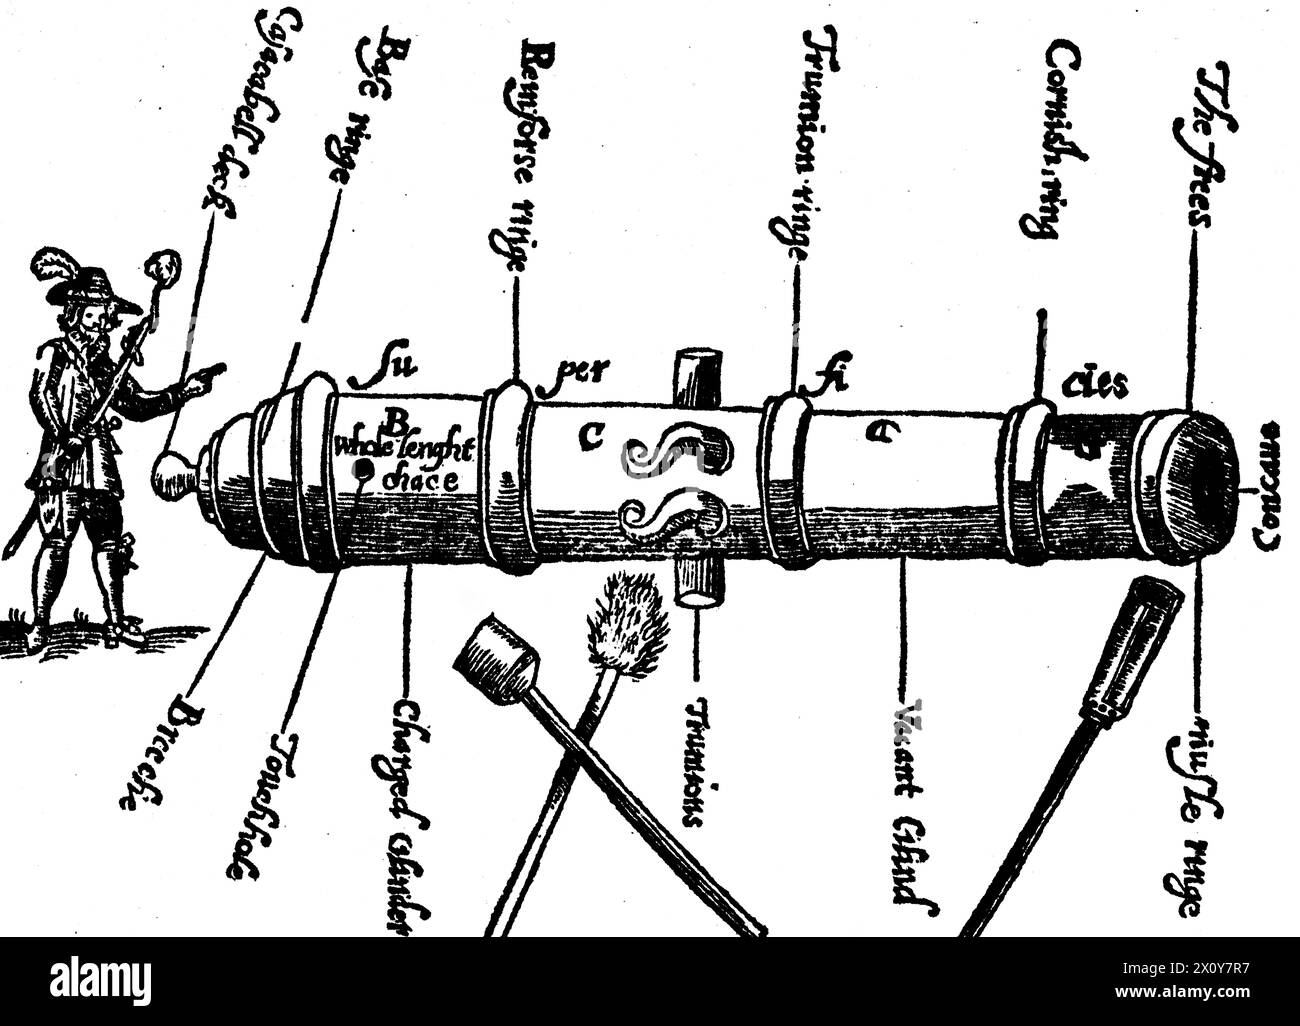 A 17th century cannon, from the frontispiece to John Roberts's 'The Compleat Canonier', 1652. The Compleat Canonier gives a description of the Gunner's art during the period of the English Civil War. Stock Photo